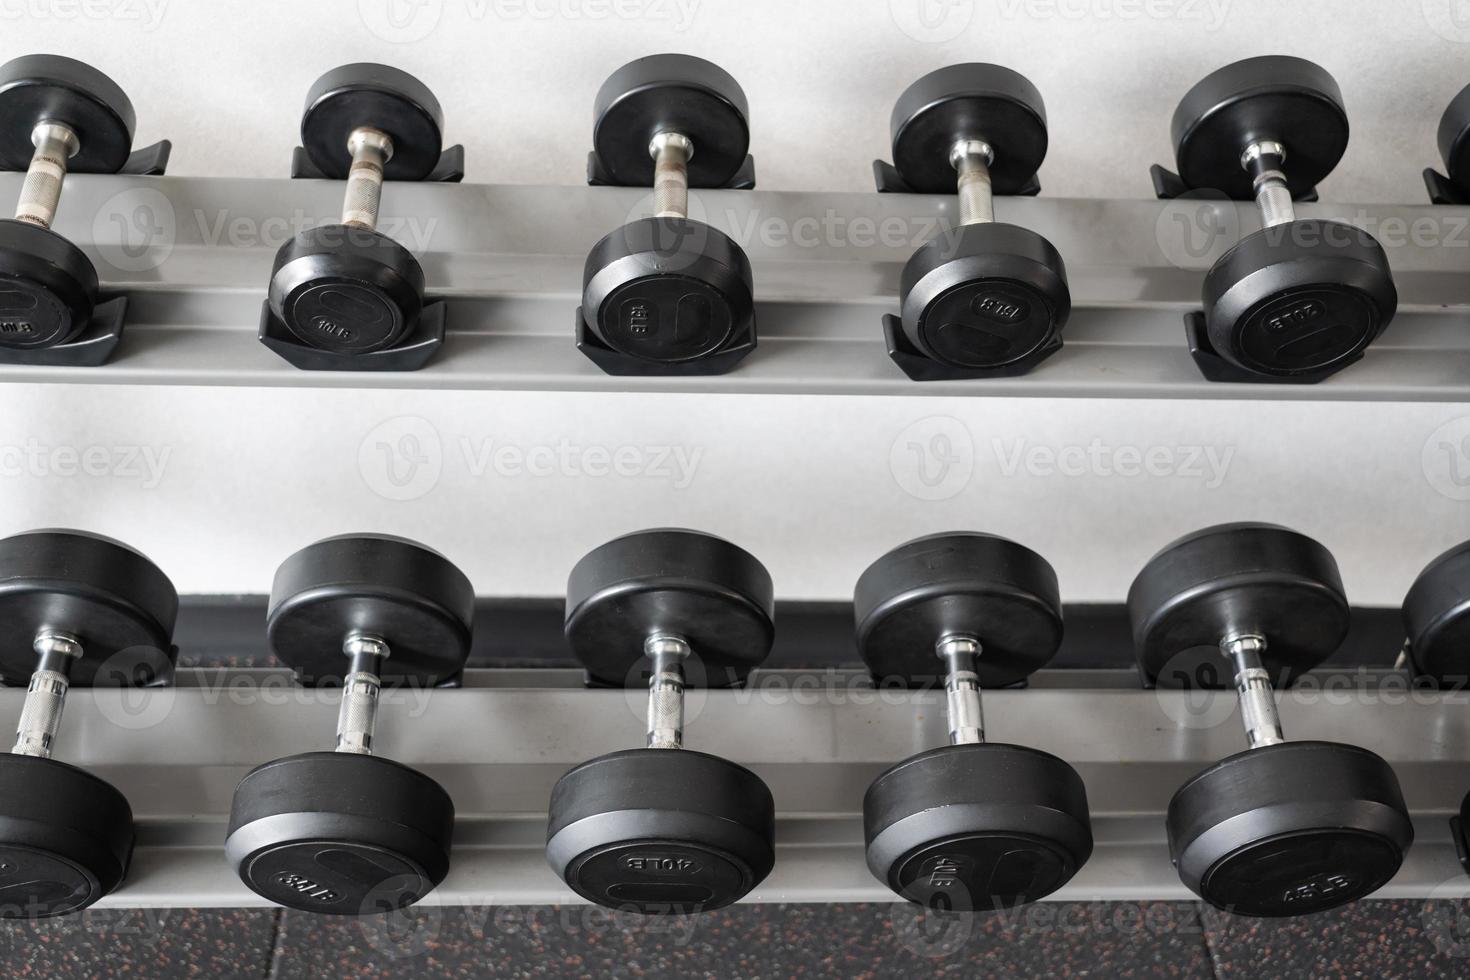 Stand with dumbbells. Sports and fitness room. Weight Training Equipment. Black dumbbell set, many dumbbells on rack in sport fitness center photo